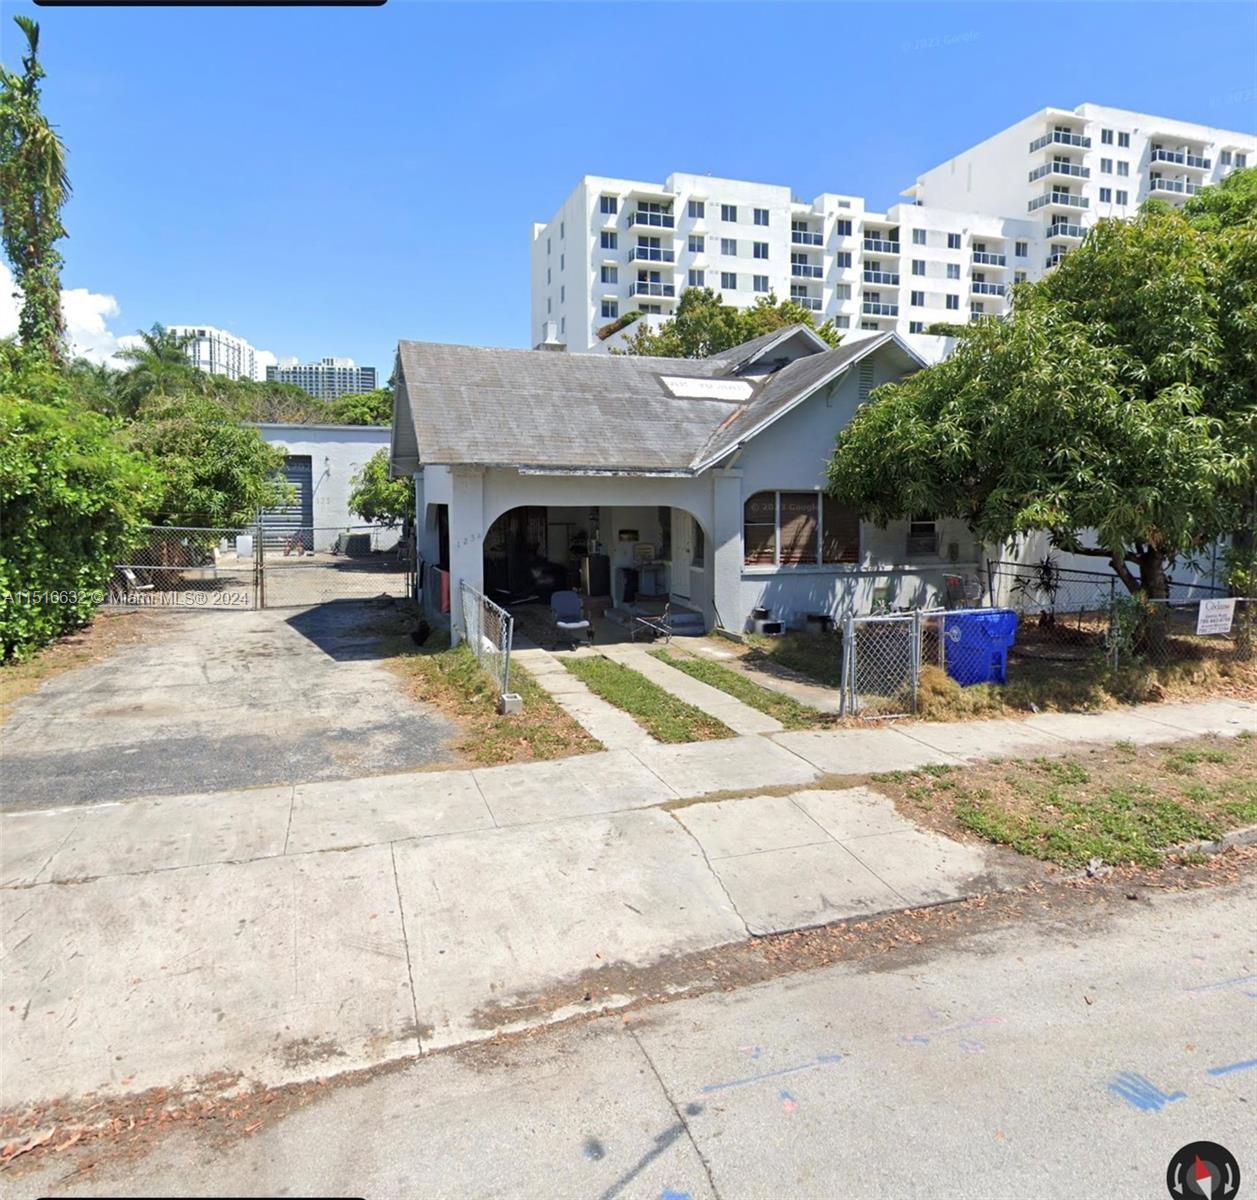 IN THE HEART OF EDGEWATER ONE BLOCK OF BISCAYNE BLVD, 11,240 SQ FT LAND FOR A SMALL RESIDENTIAL 0R C